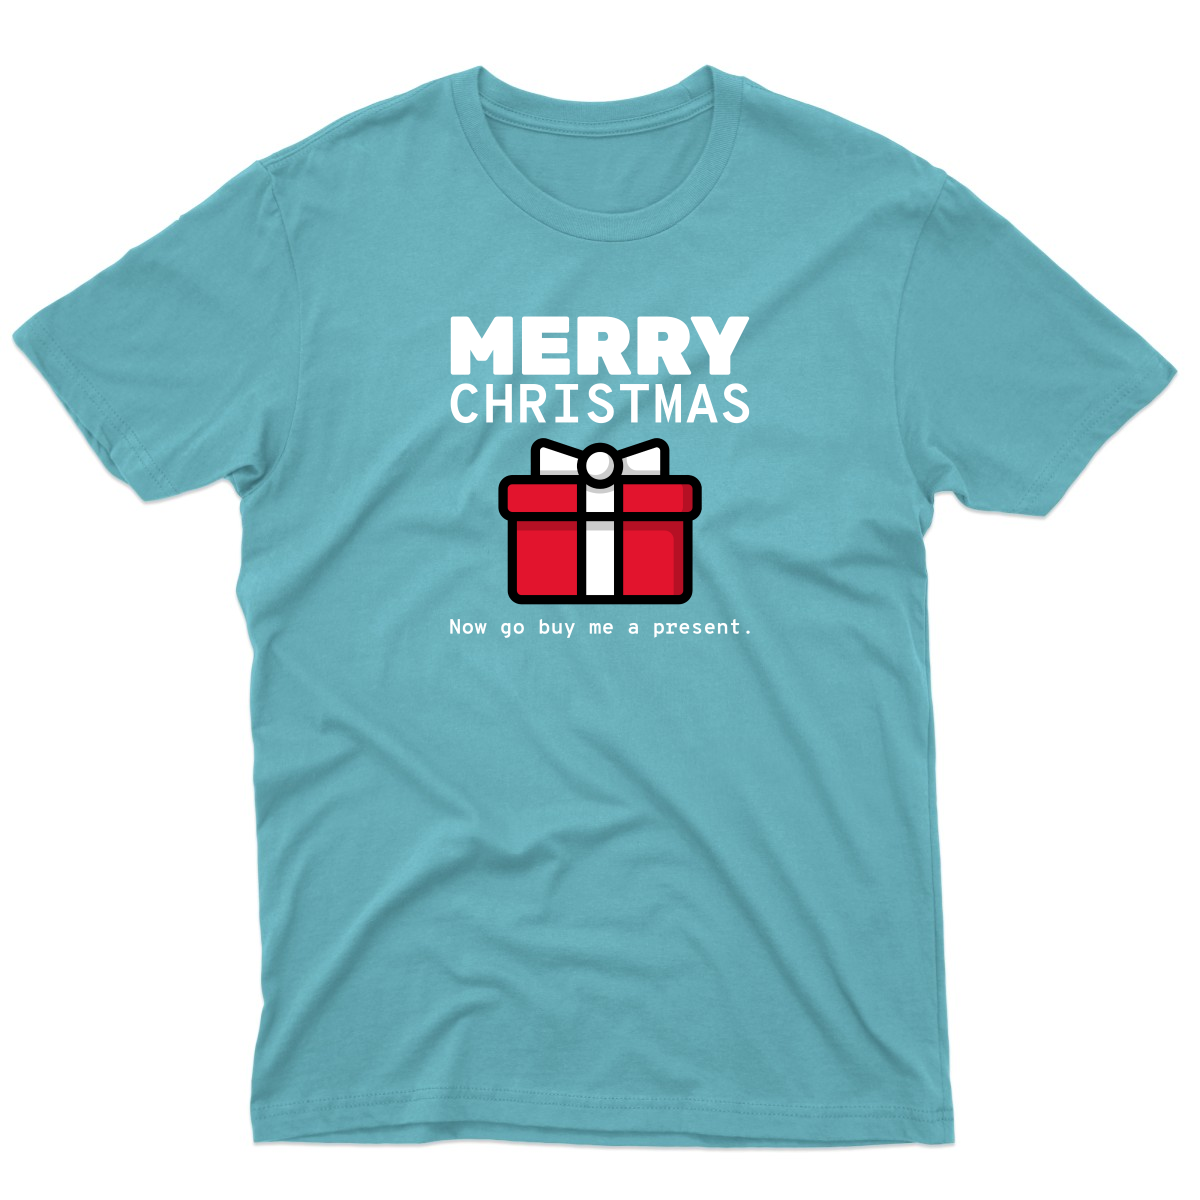 Merry Christmas Now Go Buy Me a Present Men's T-shirt | Turquoise